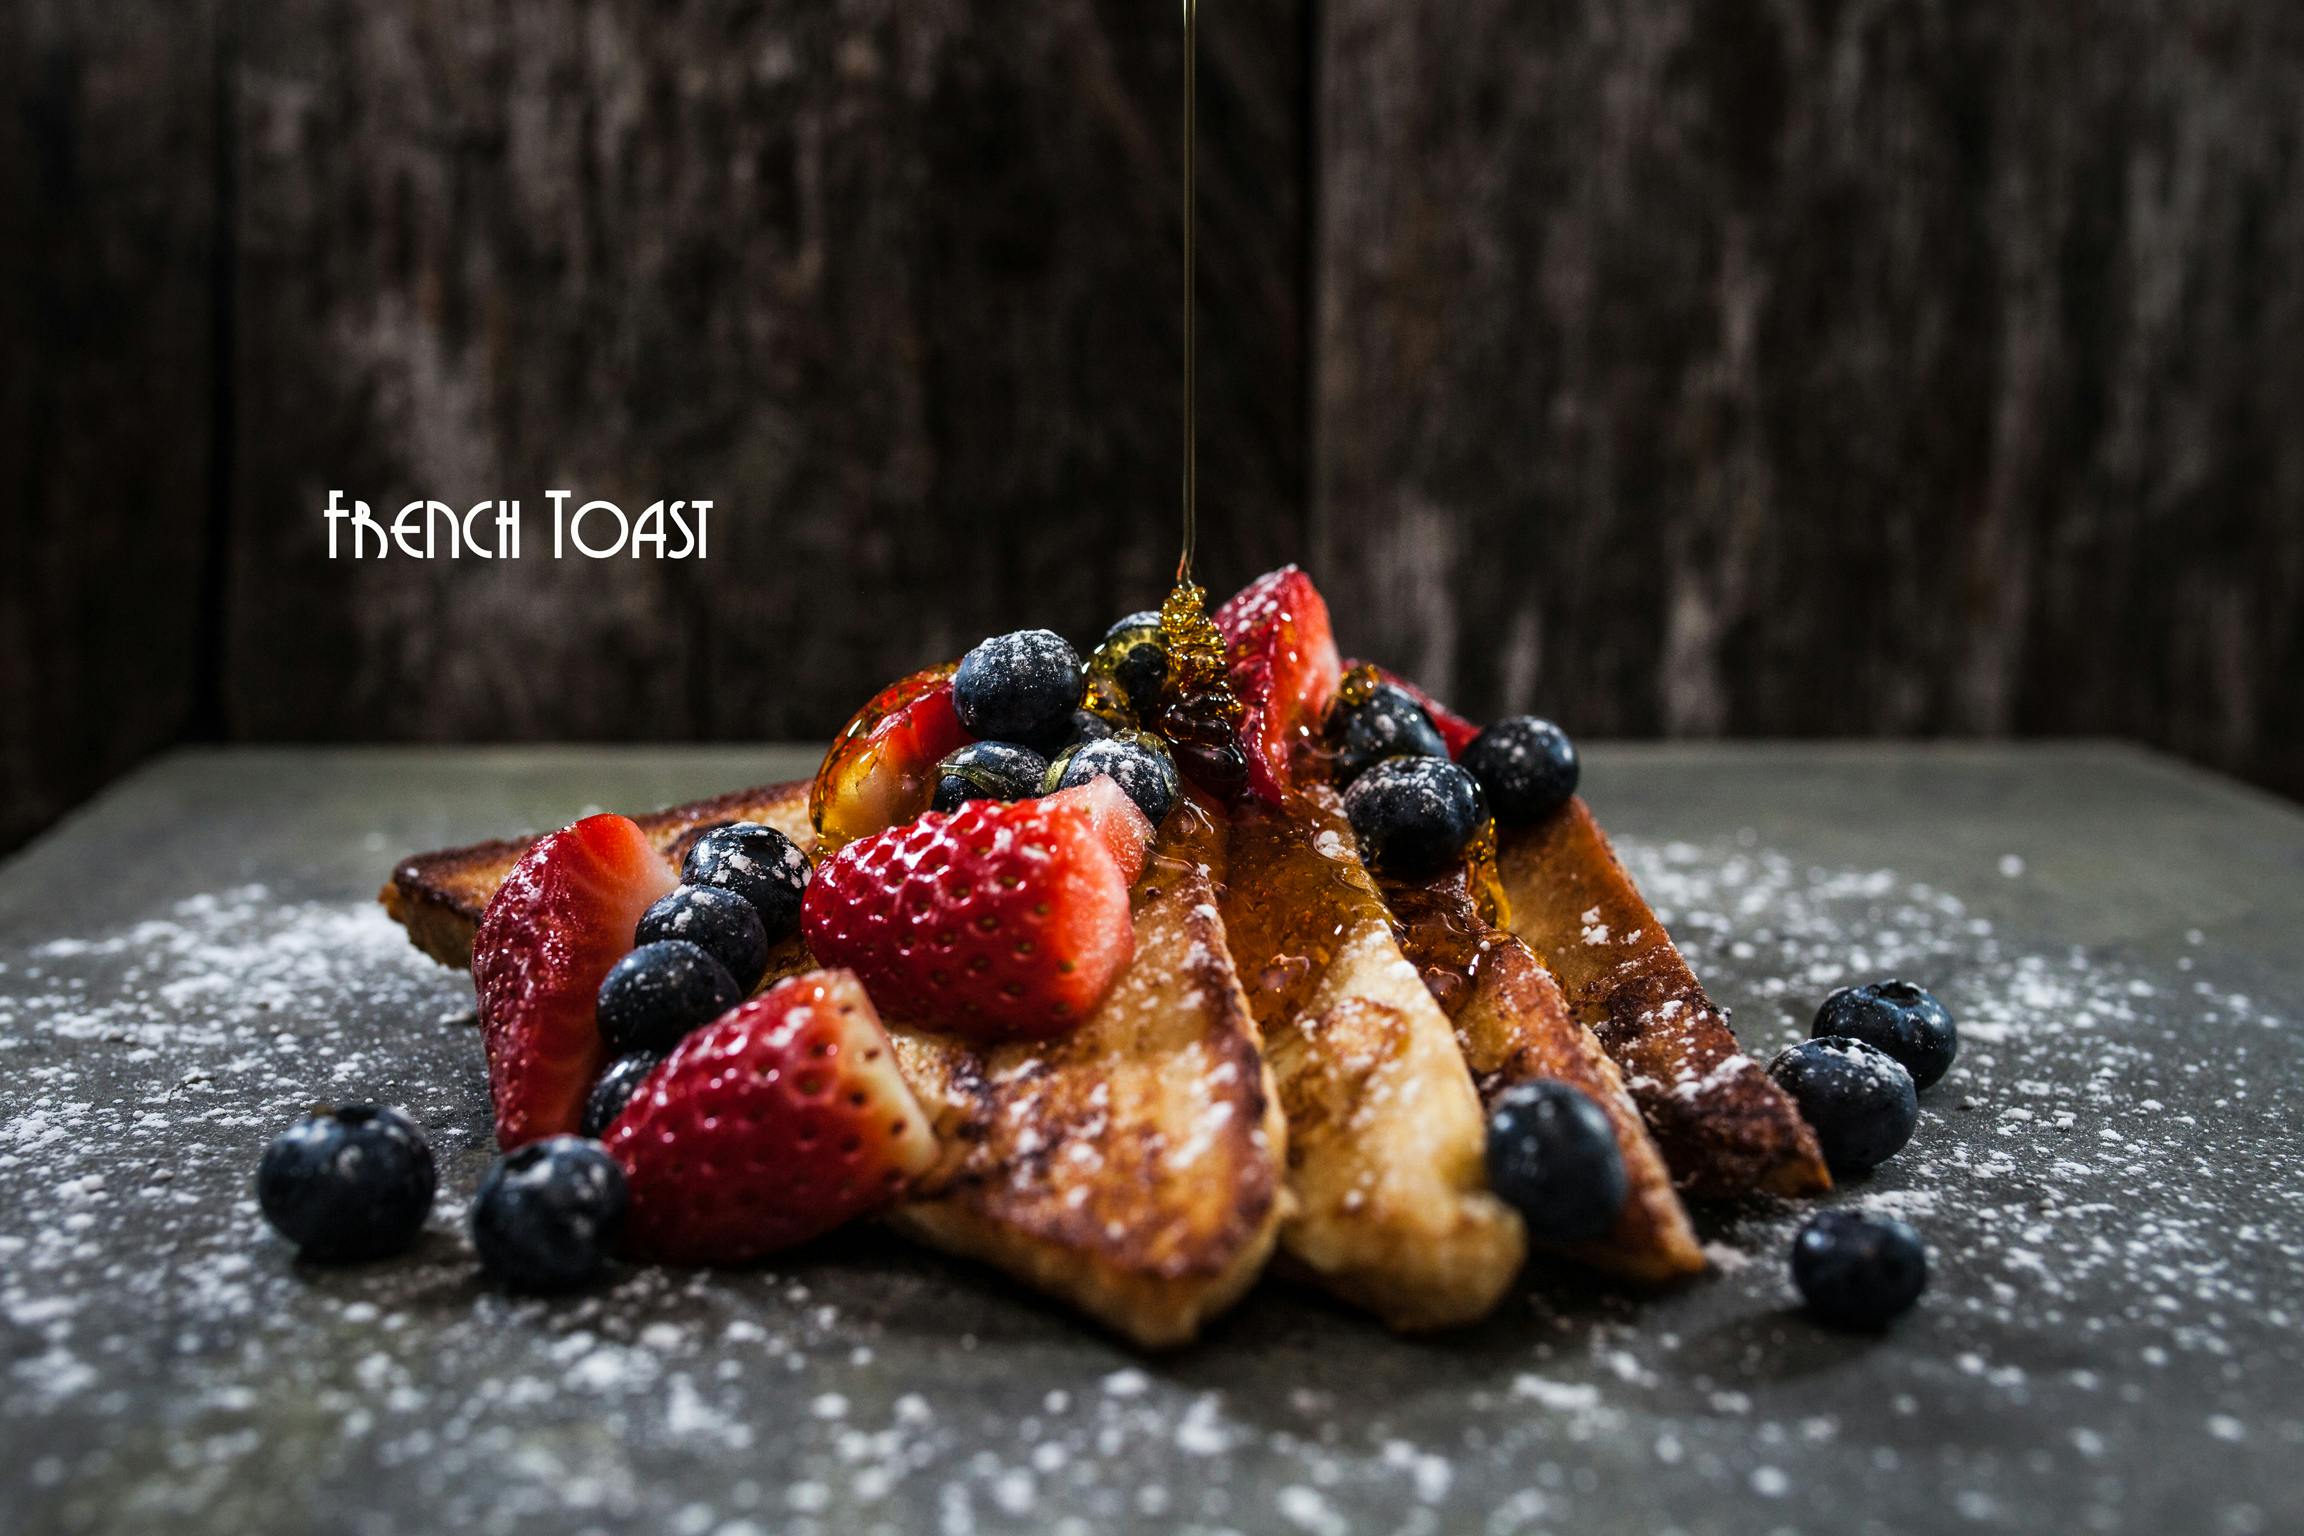 four pieces of fresh prepared french toast with a mix of fresh fruits and maple syrup, coated by icing sugar